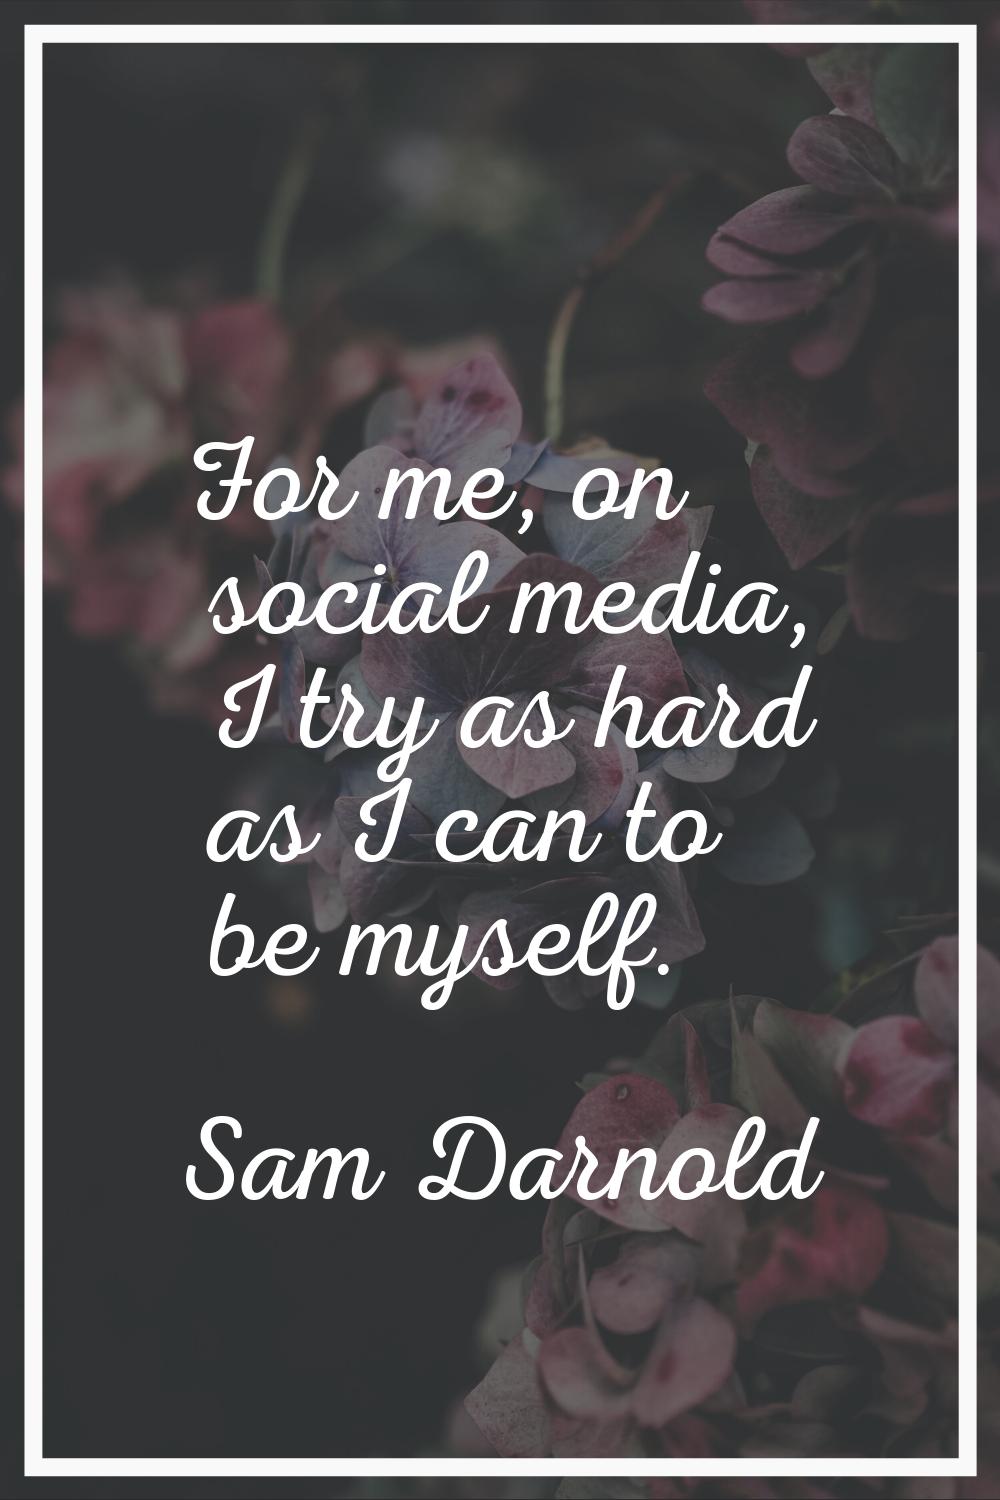 For me, on social media, I try as hard as I can to be myself.